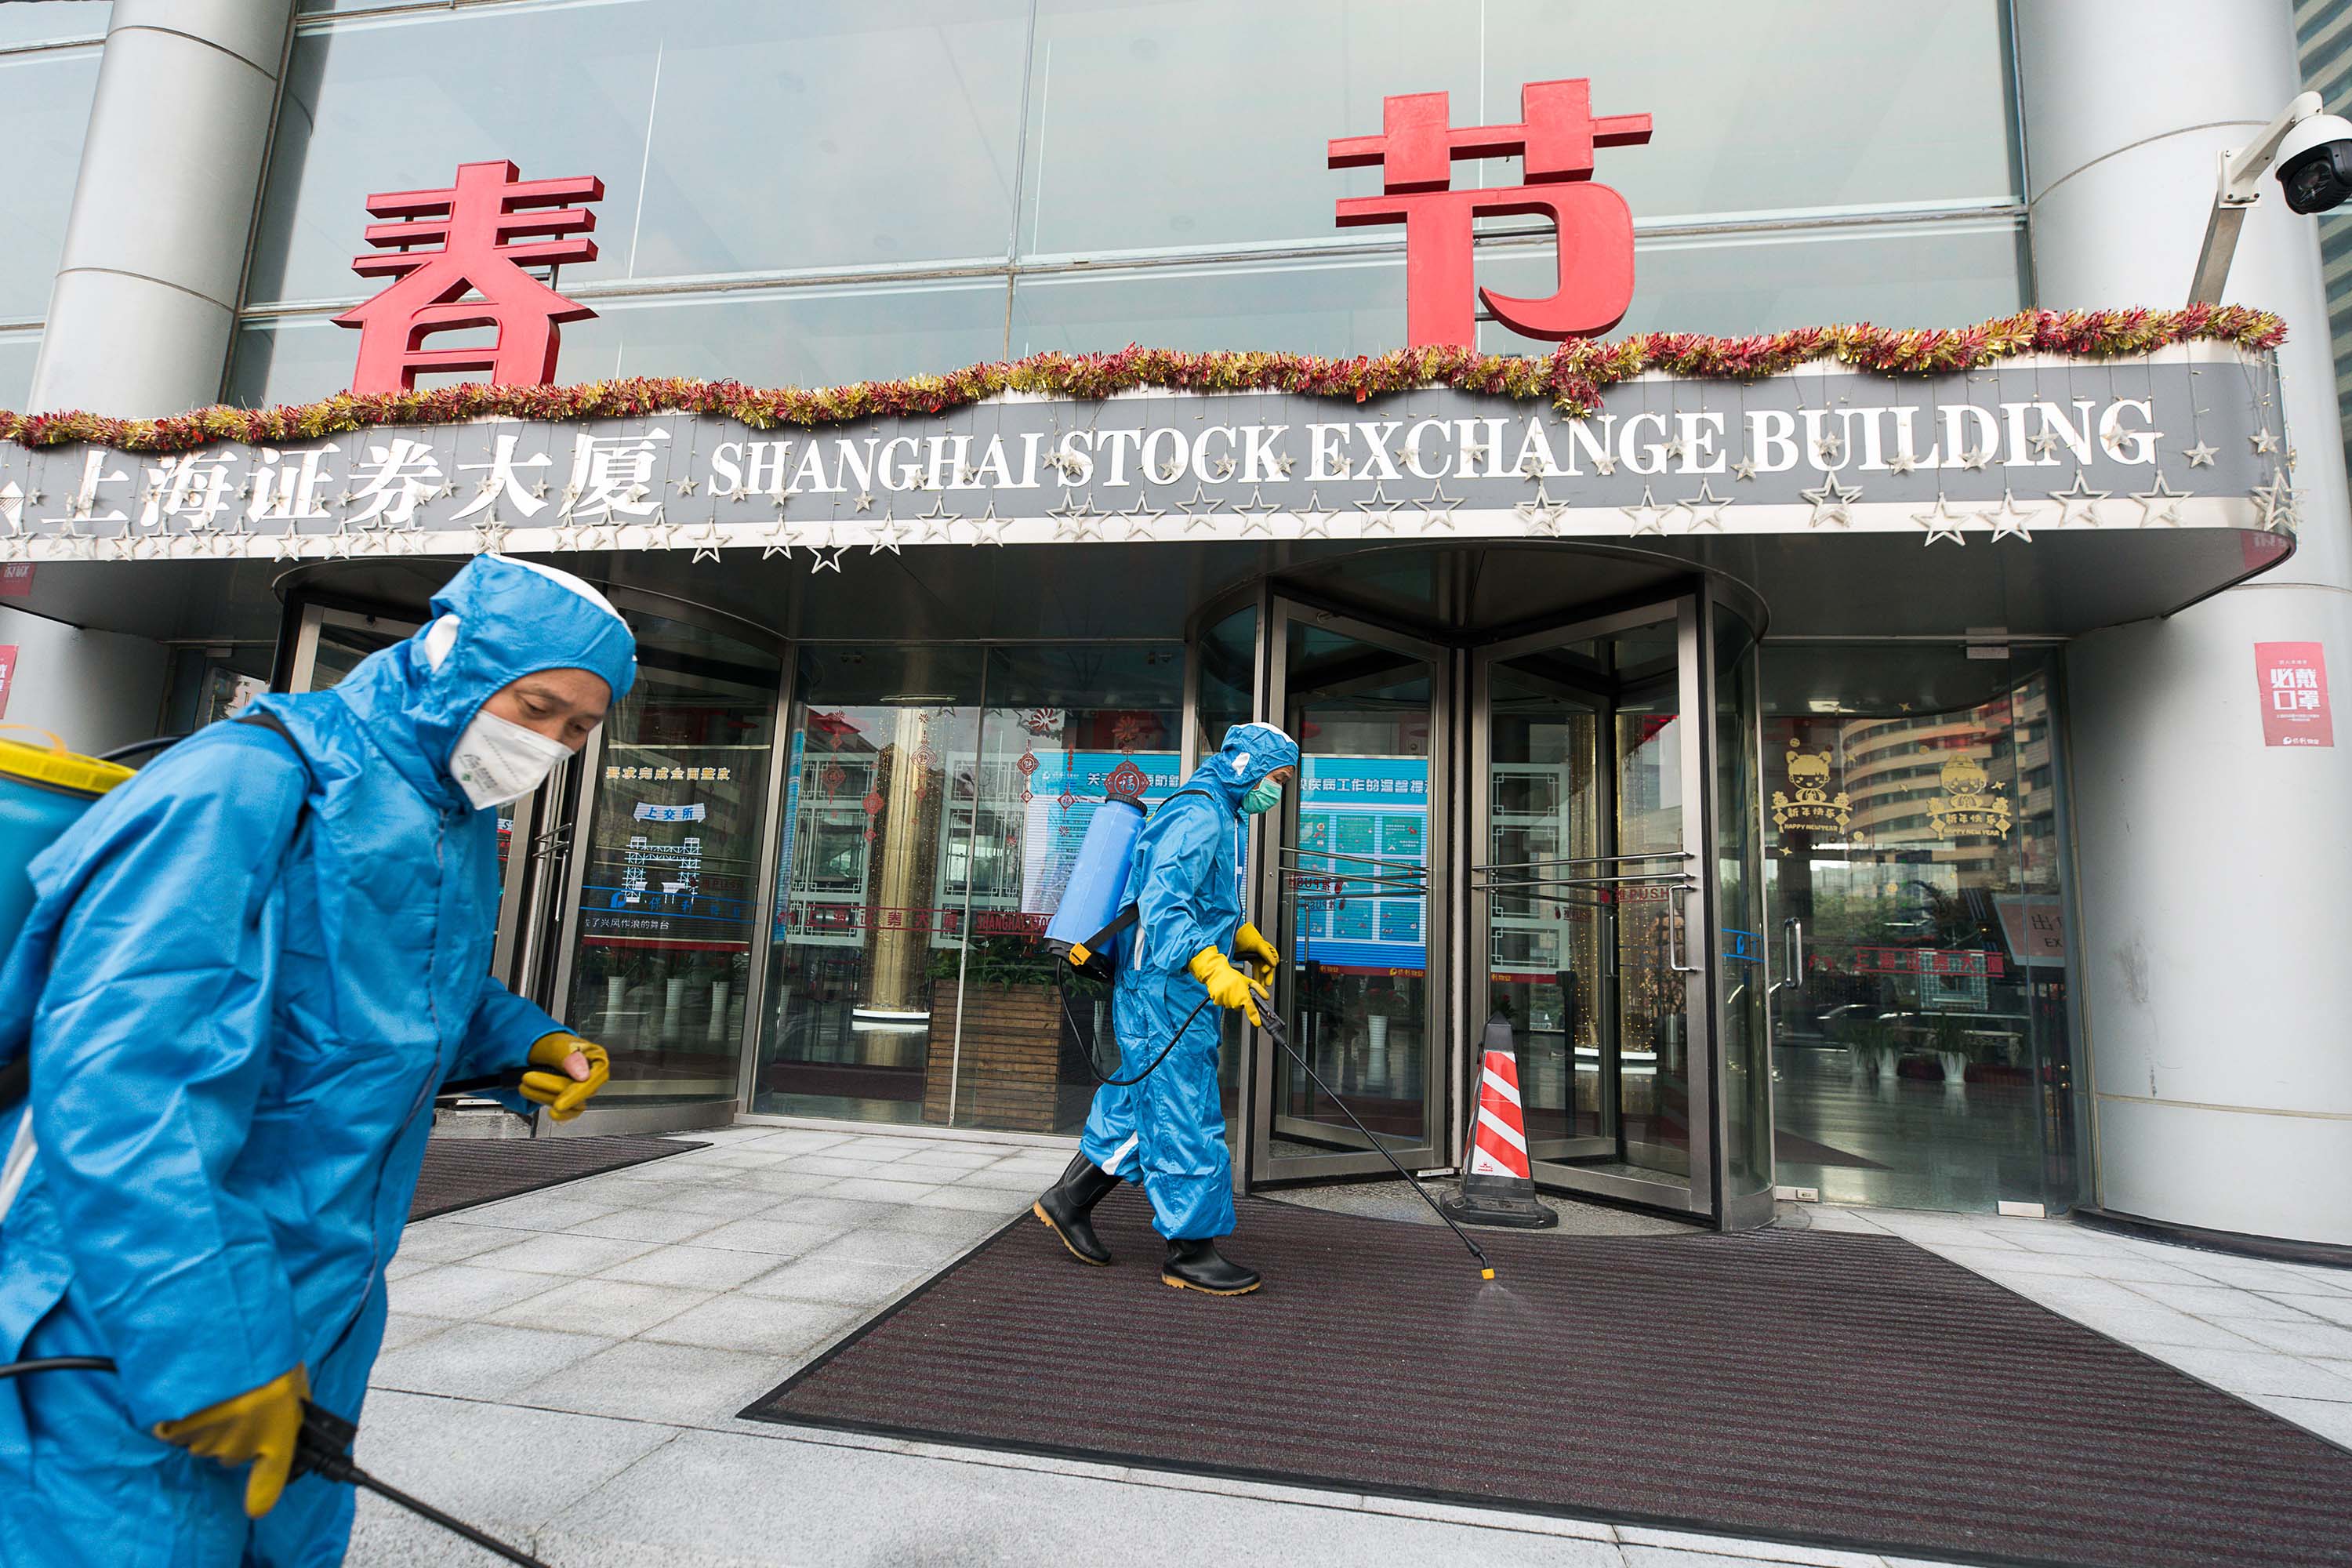 Medical workers spray antiseptic outside of the Shanghai Stock Exchange Building on Monday.